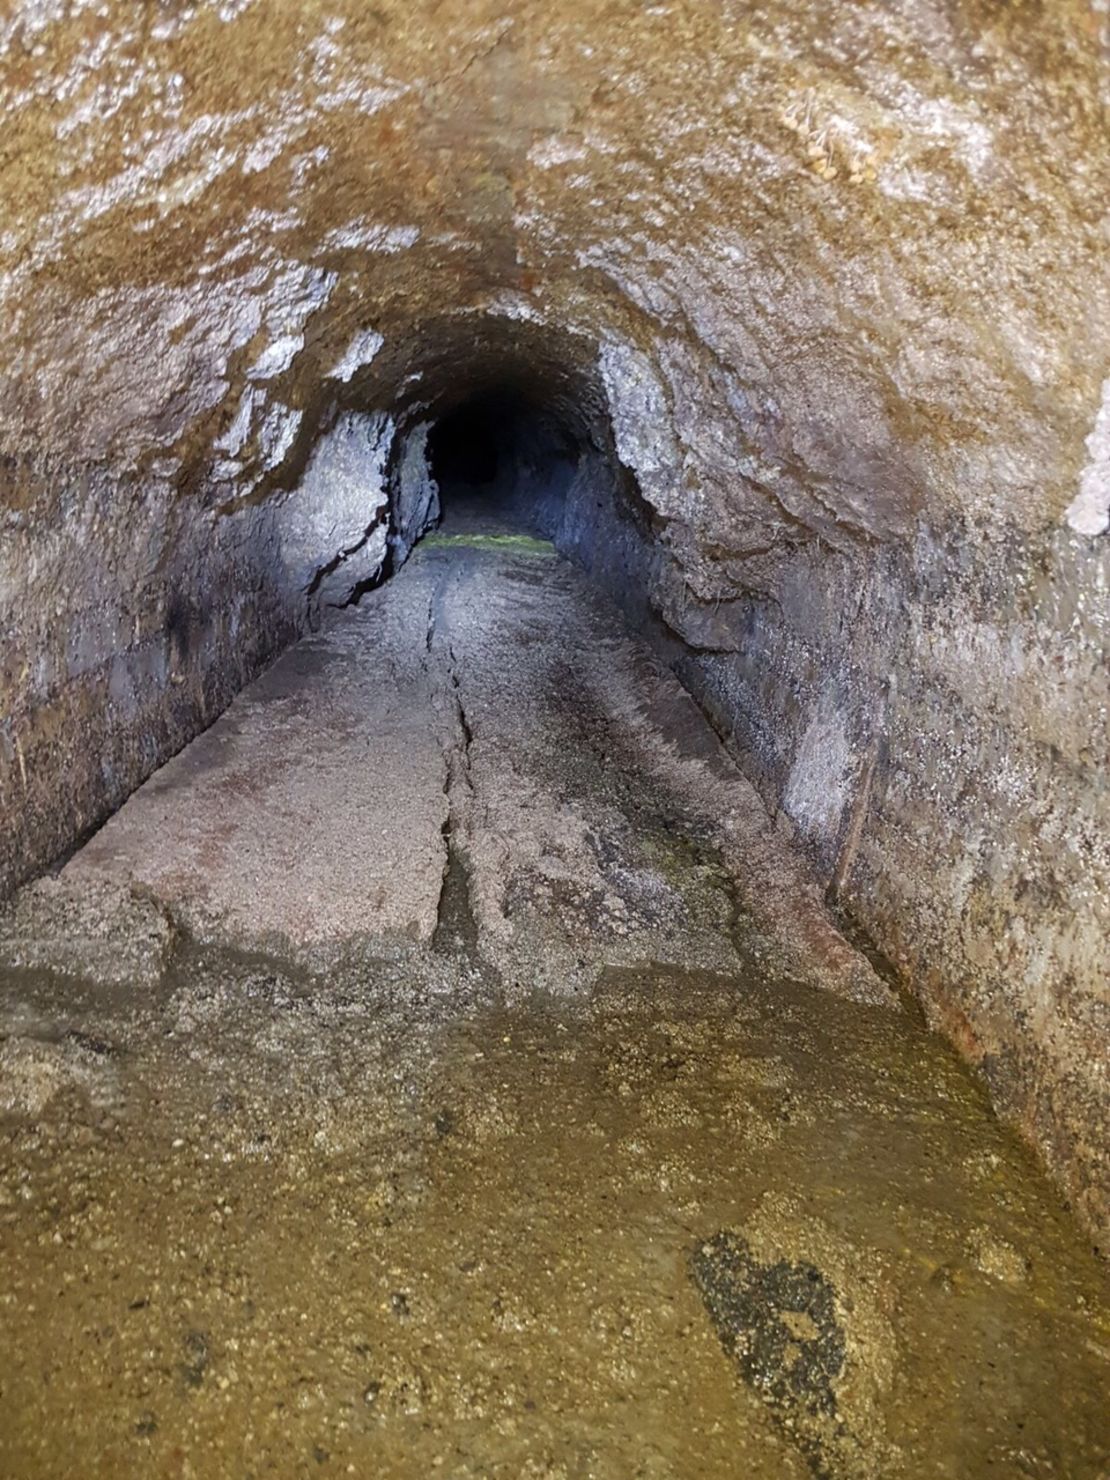 The Whitechapel sewer during removal of the fatberg